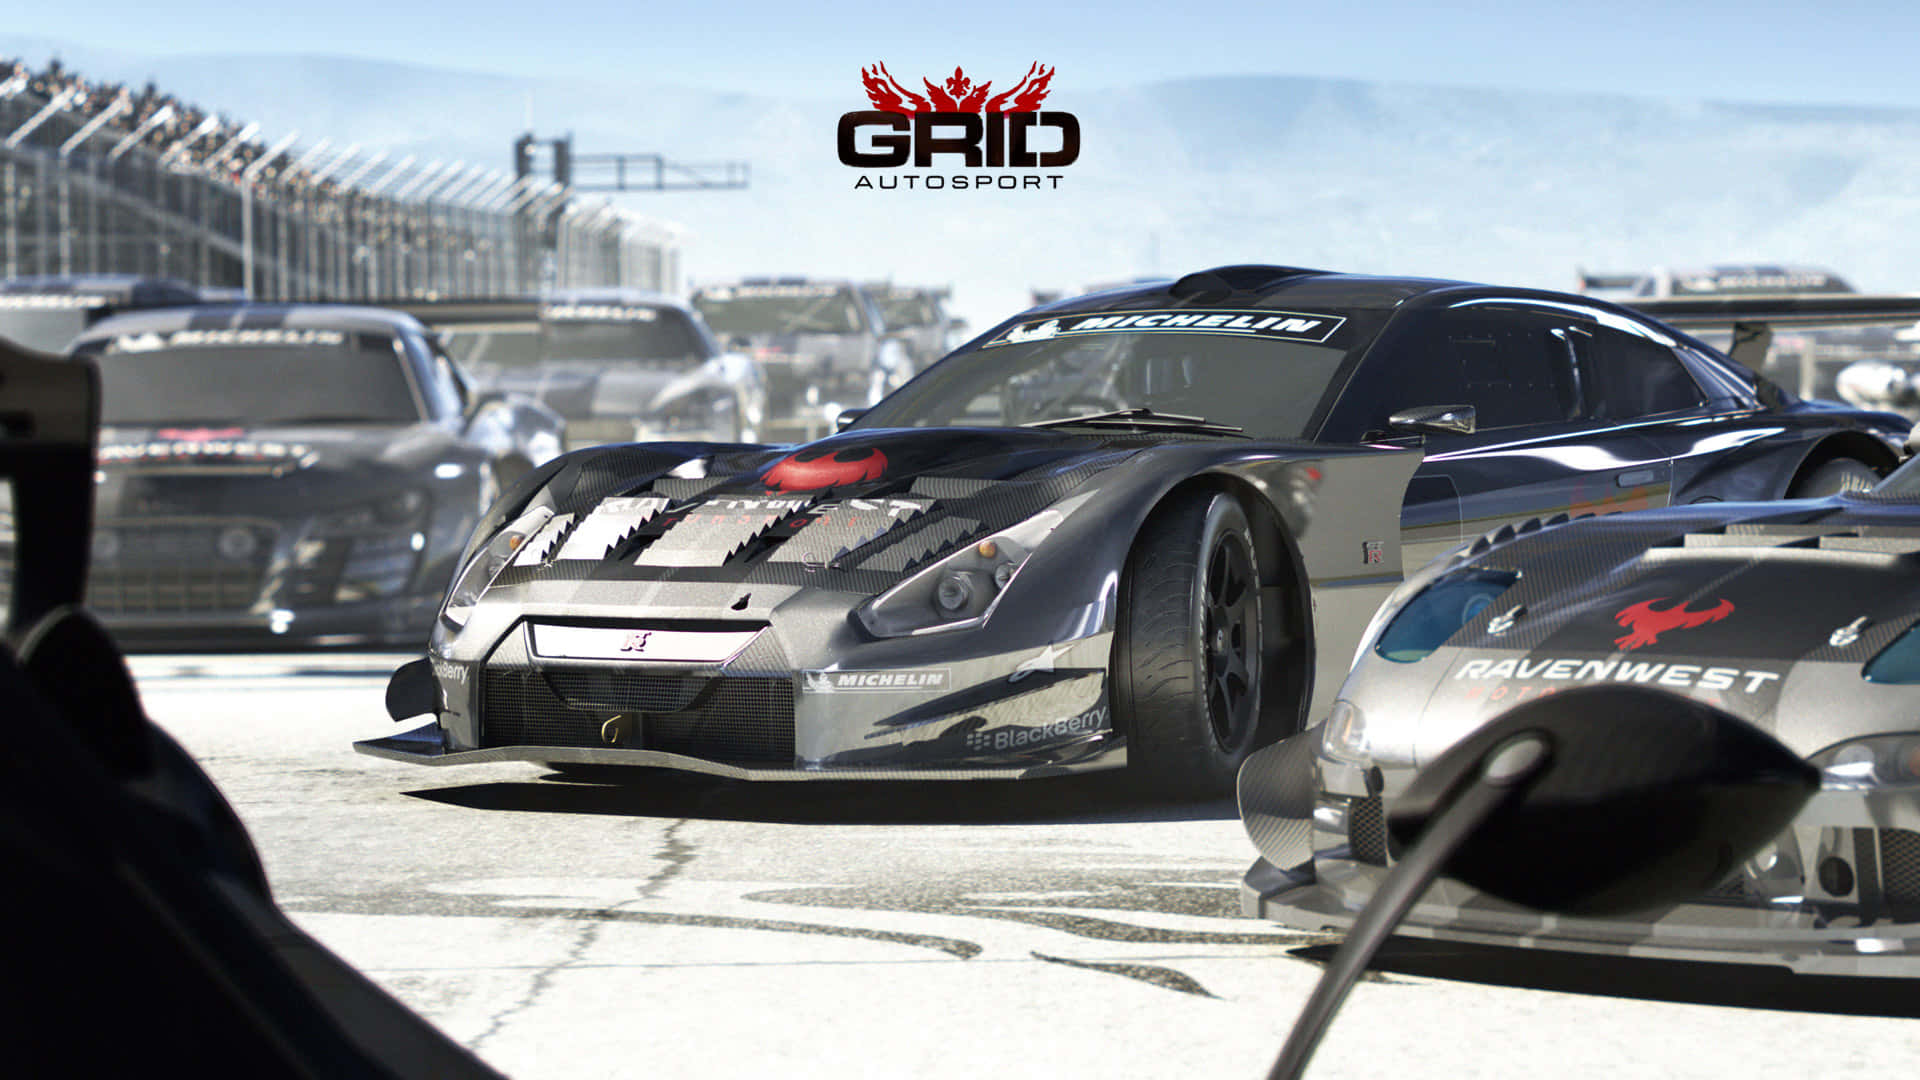 Get behind the wheel and take control of a professional race car with 1080p Grid Autosport